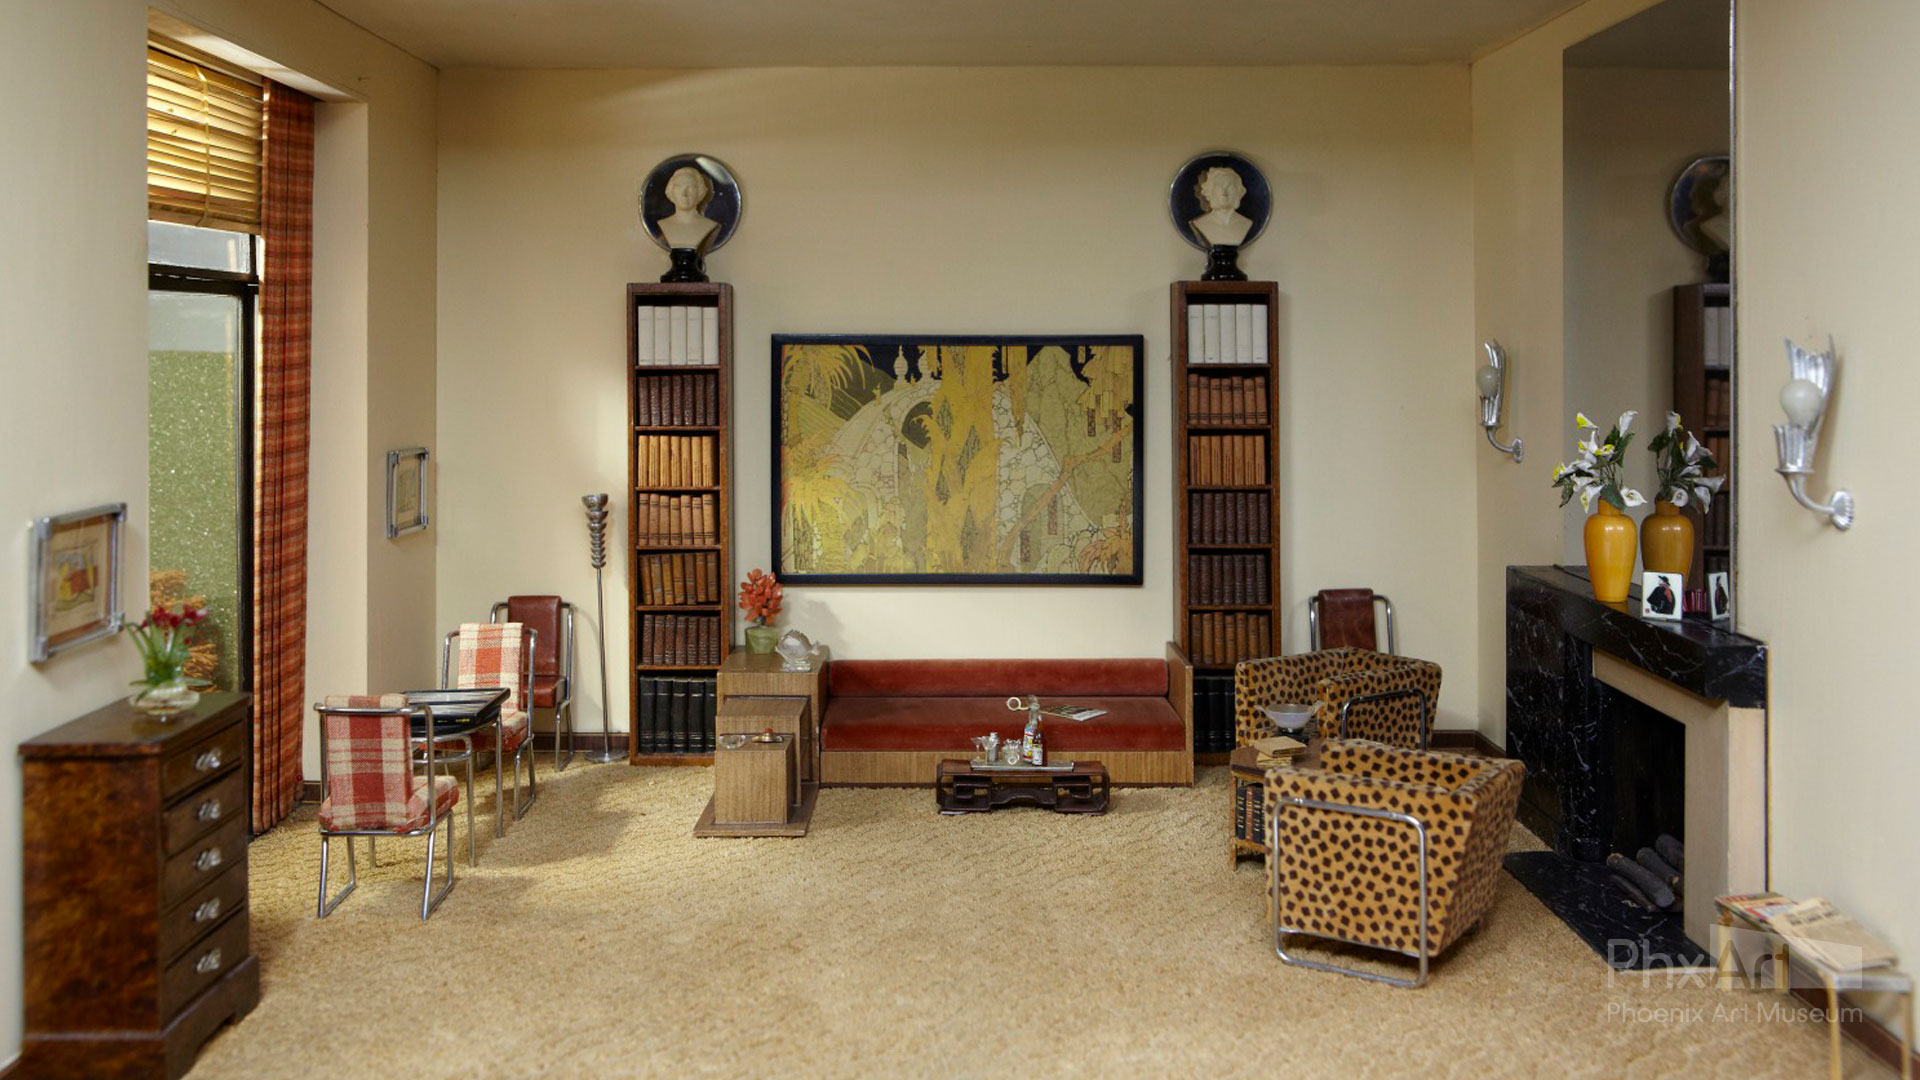 Narcissa Niblack Thorne, Art Deco Library, c. 1925, 1932-1937. Mixed media. Gift of Niblack Thorne.